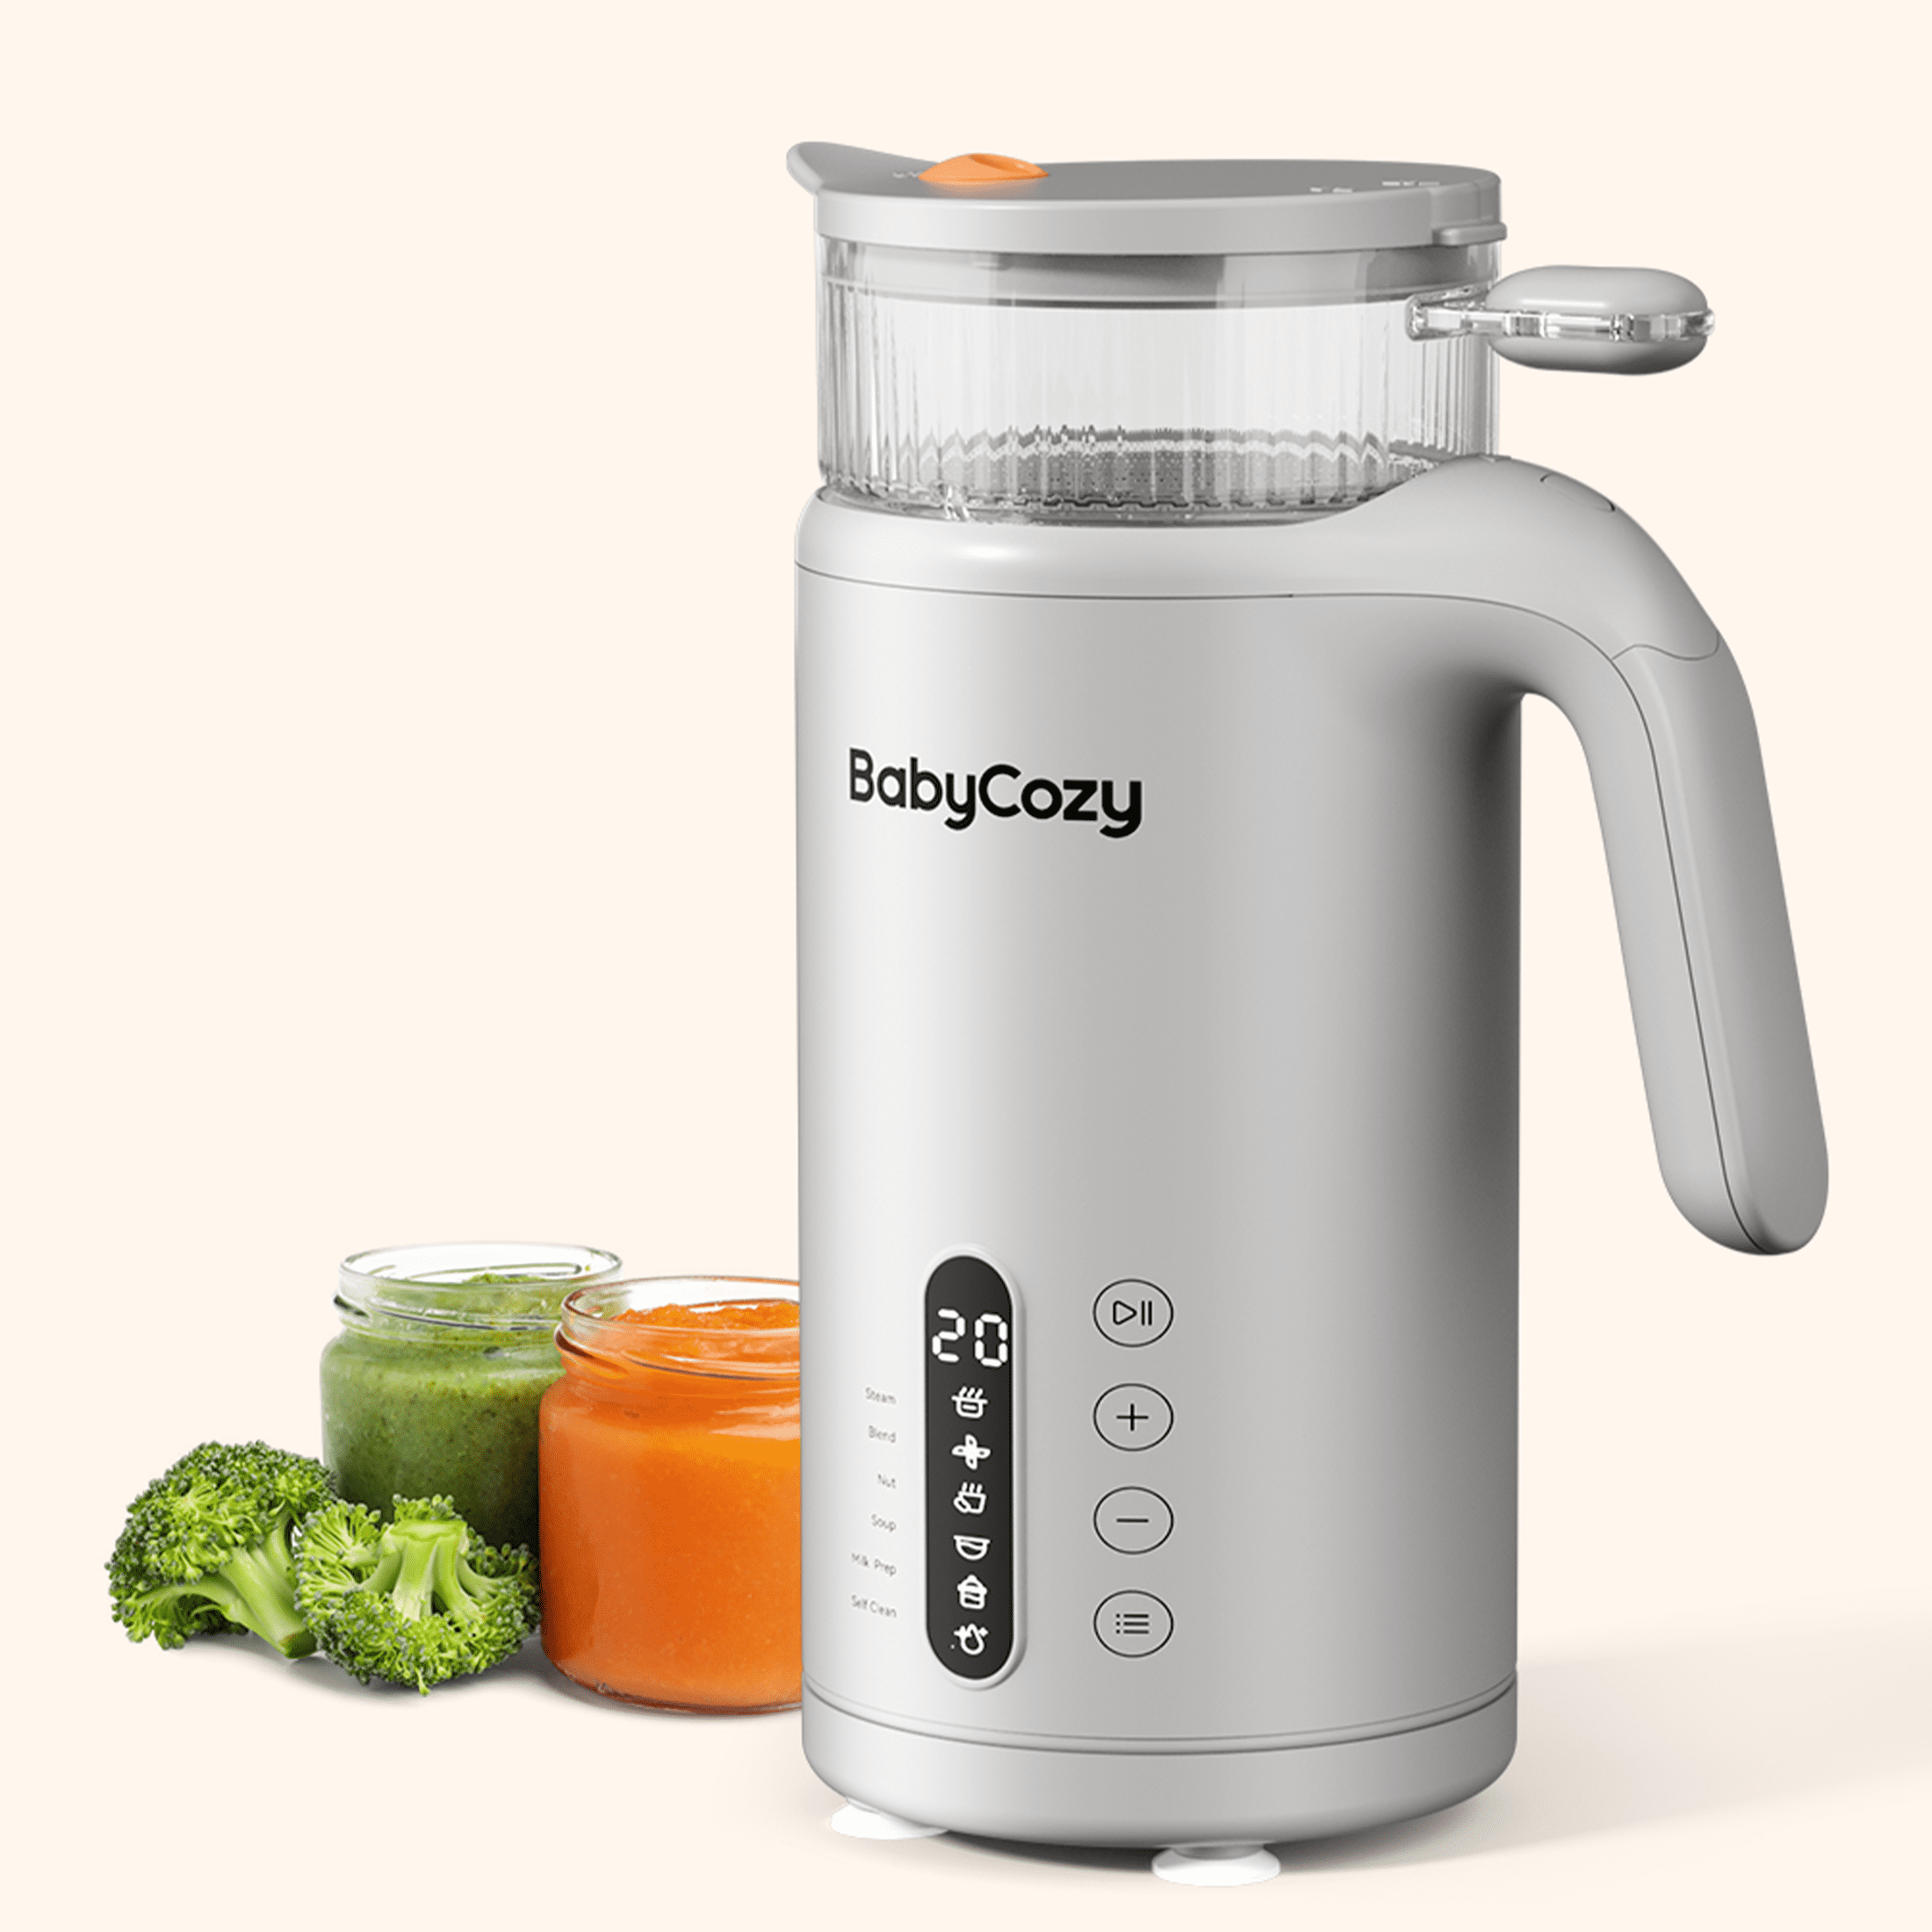  Baby Food Maker, Baby Food Processor Blender Grinder Steamer  Cooks Blends Healthy Homemade Baby Food in Minutes Touch Screen Control…  (BB1048) : Baby